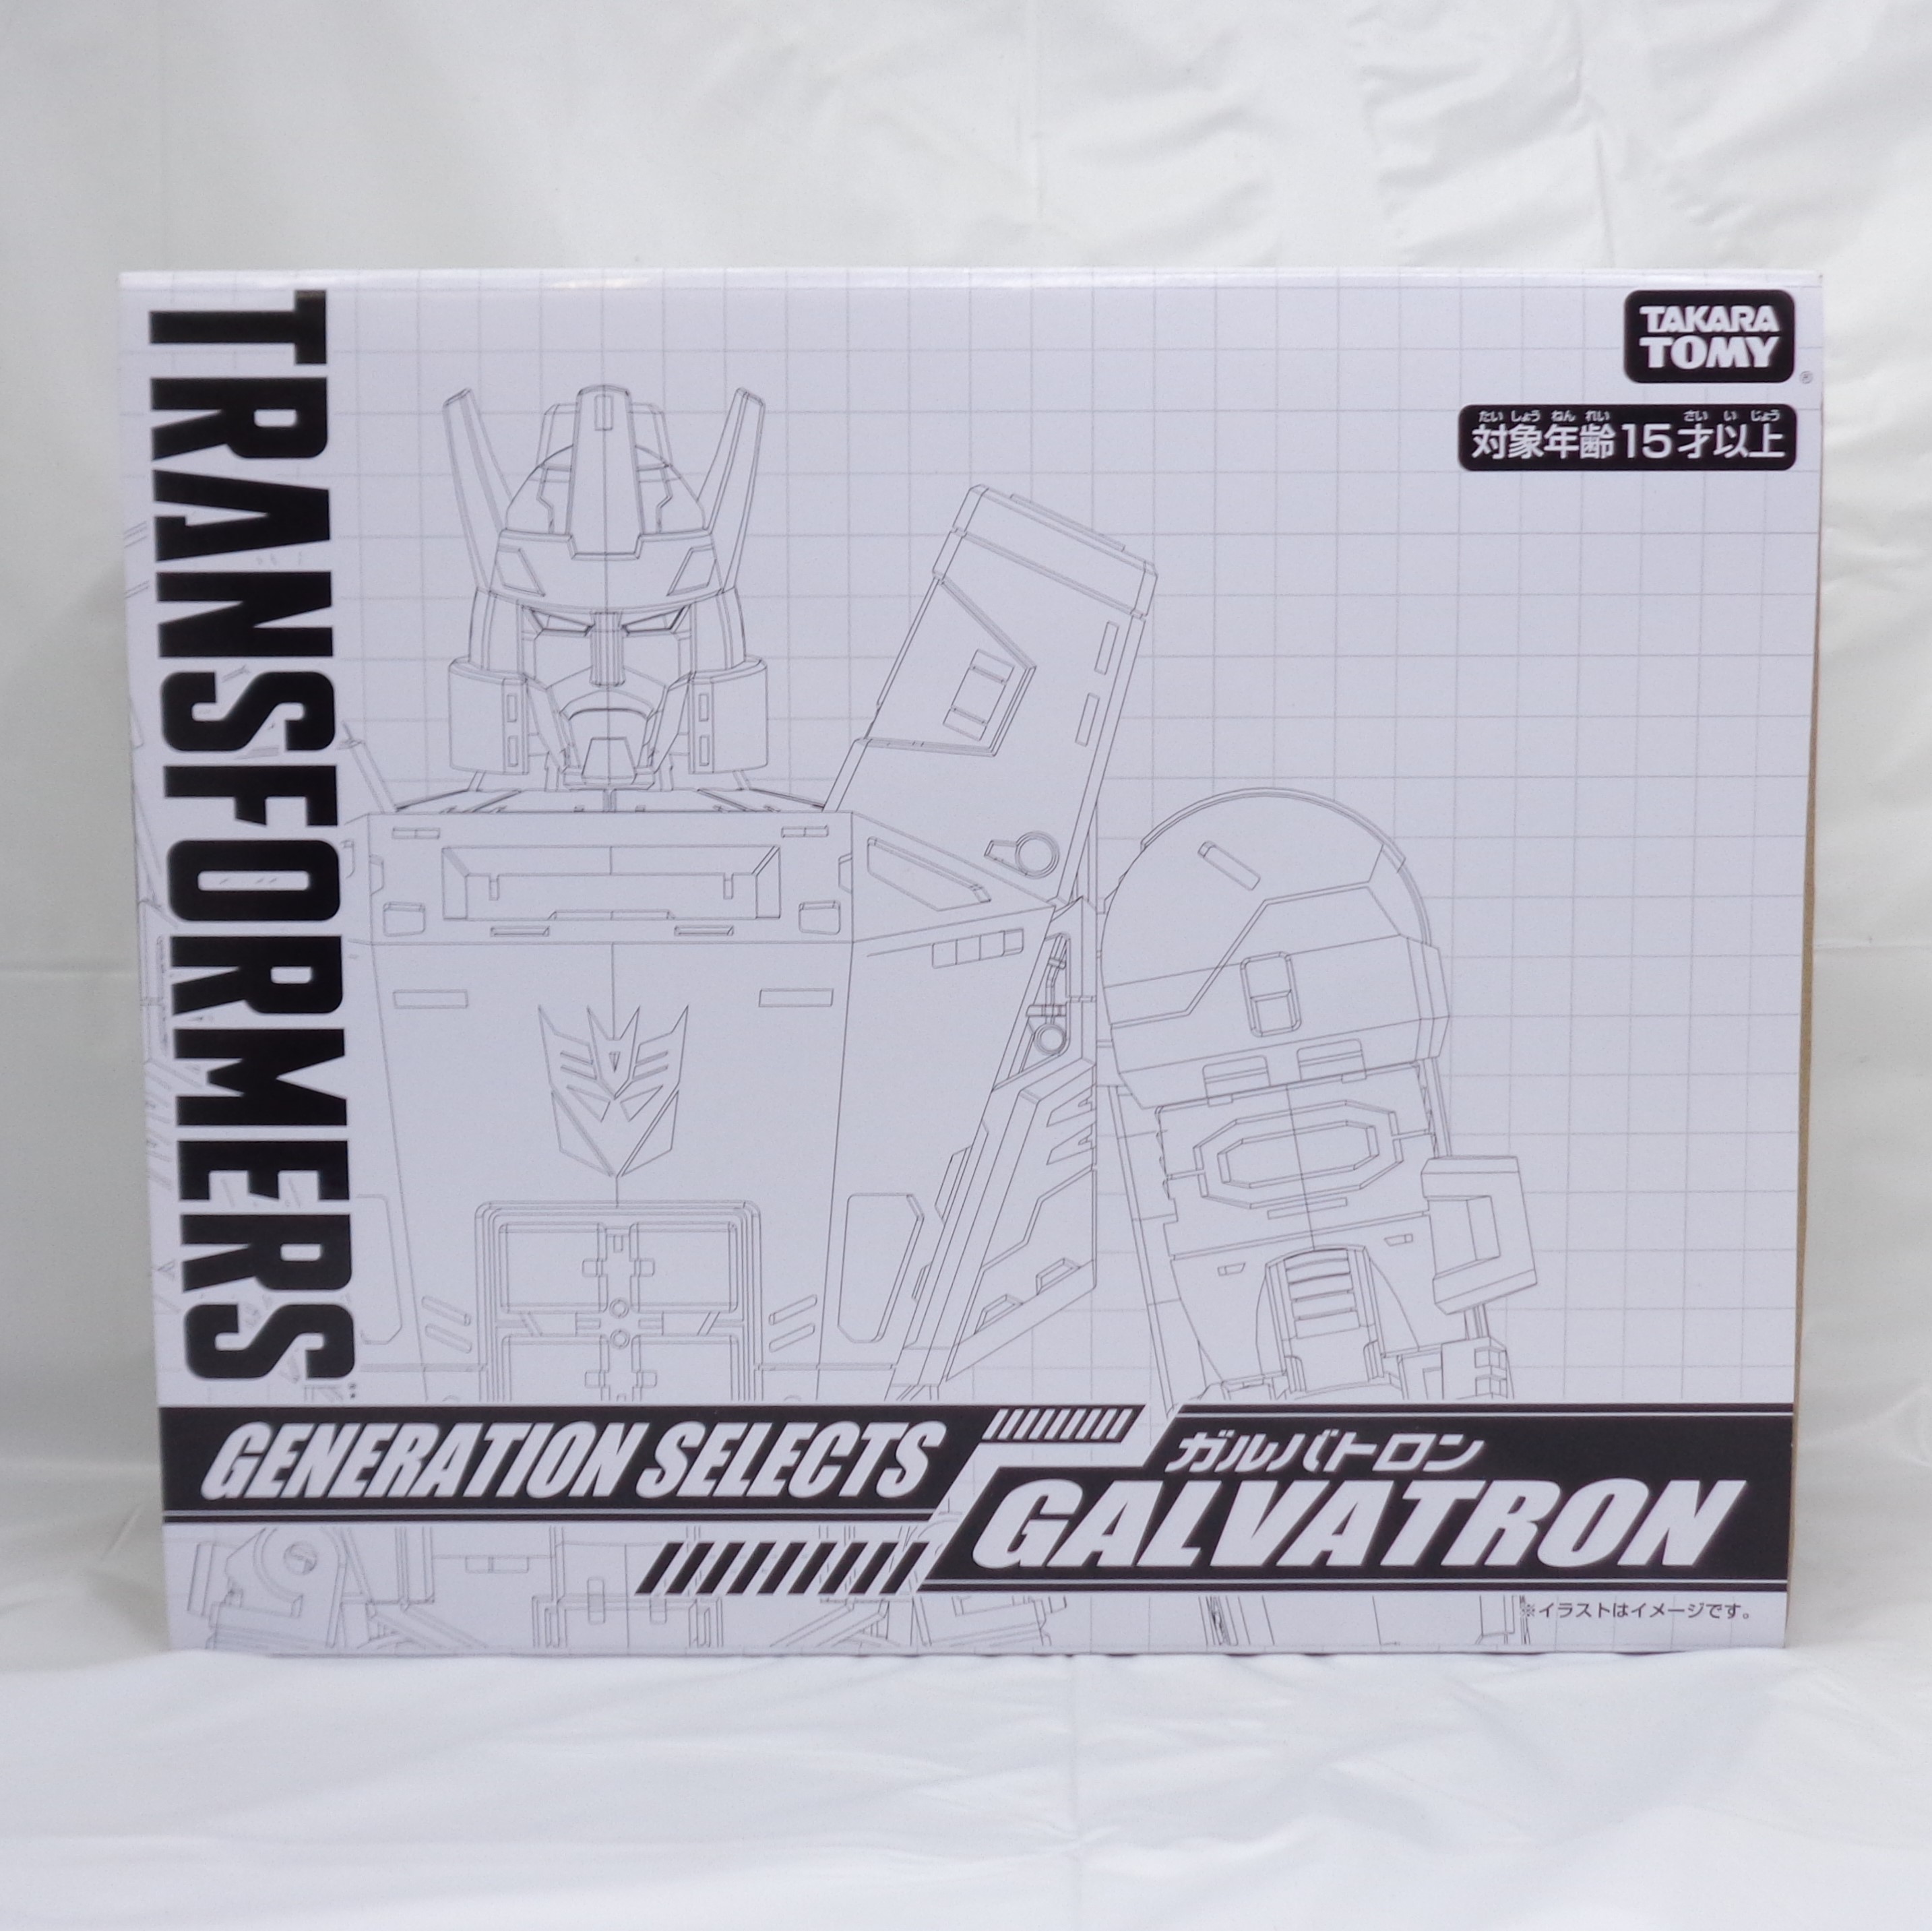 Transformers GENERATION SELECTS Galvatron